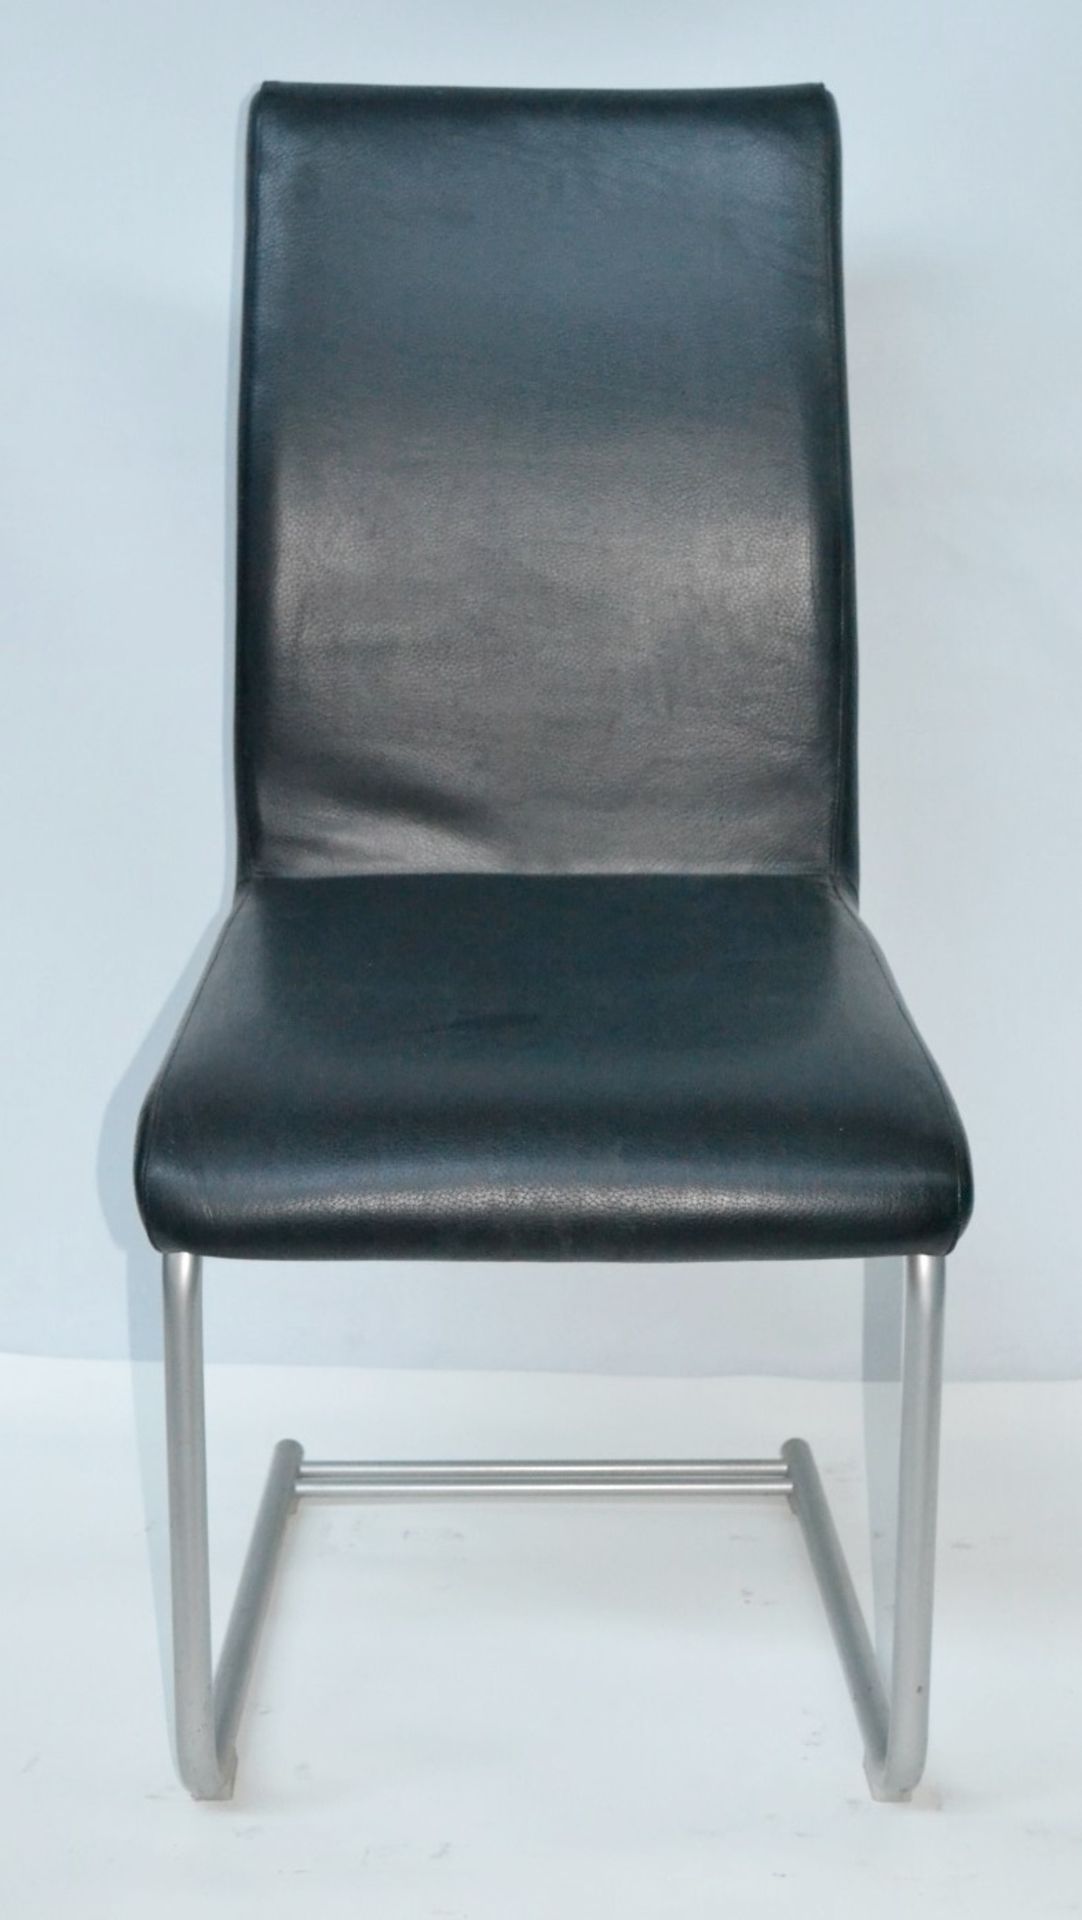 6 x Matching VENJAKOB "Let's Go" Dining Chairs - Expertly Upholstered In Black Leather With Metal Ca - Image 2 of 9